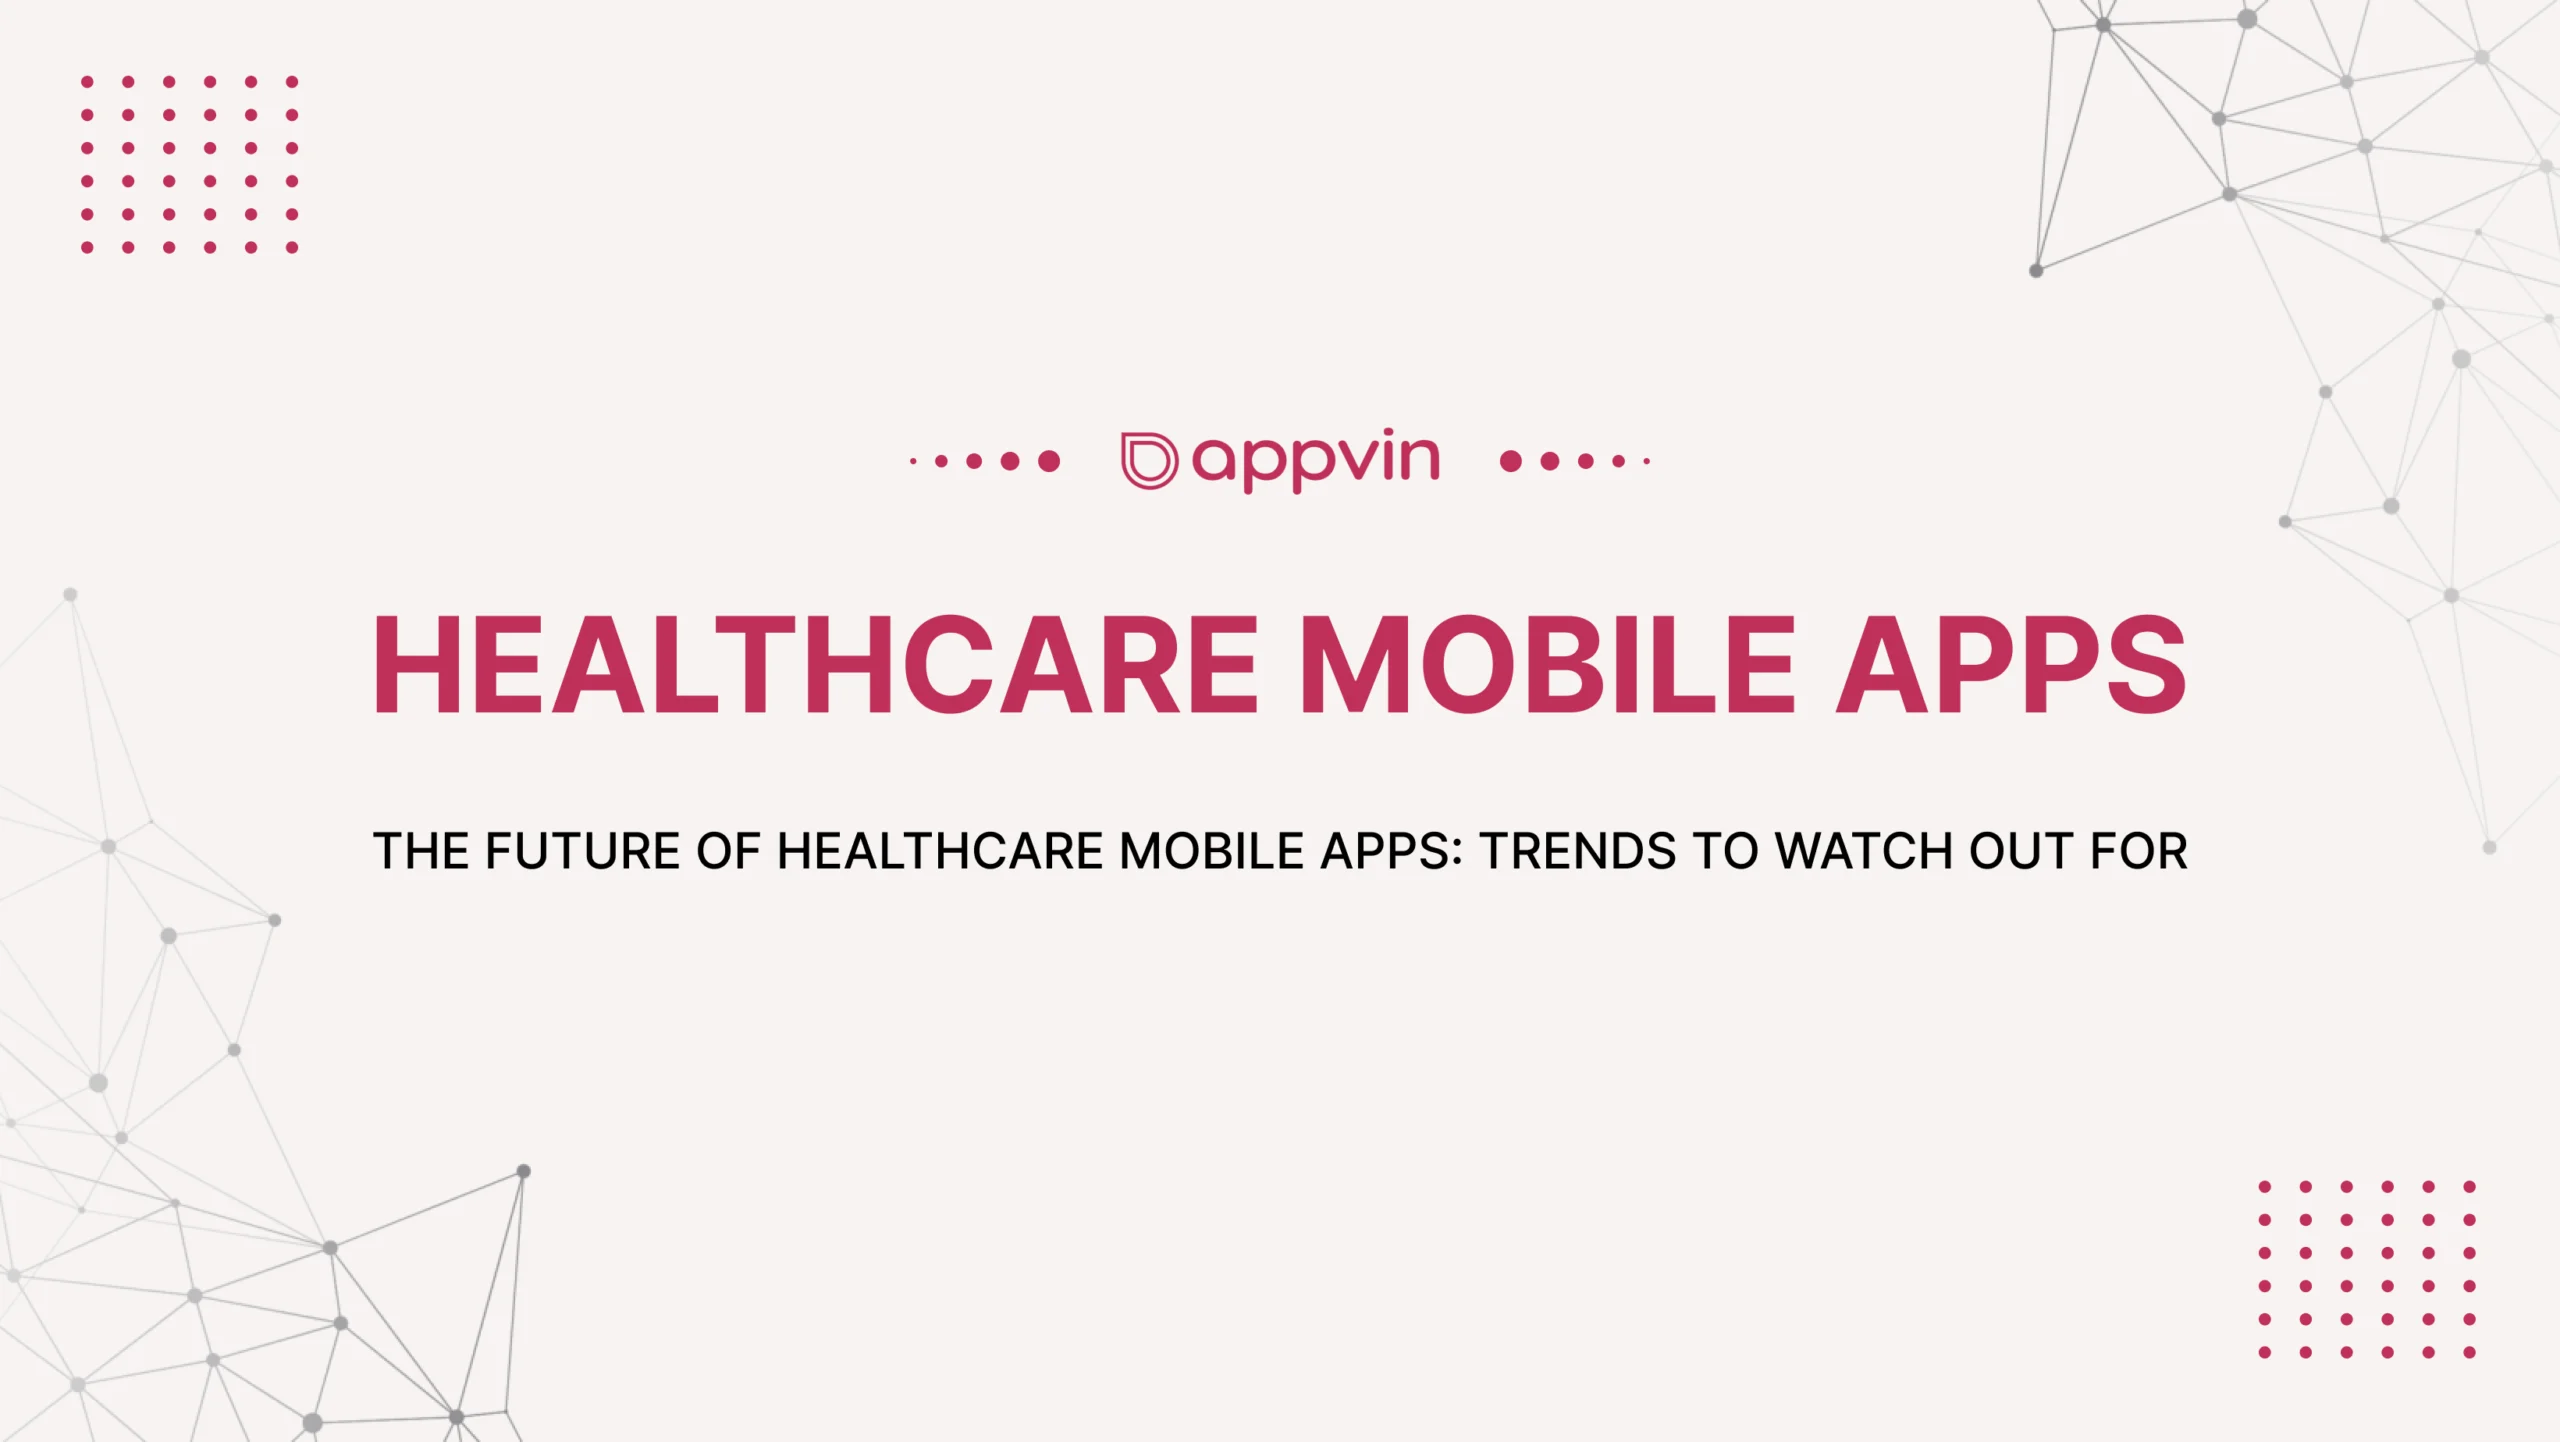 The Future of Healthcare Mobile Apps: Trends to Watch Out For